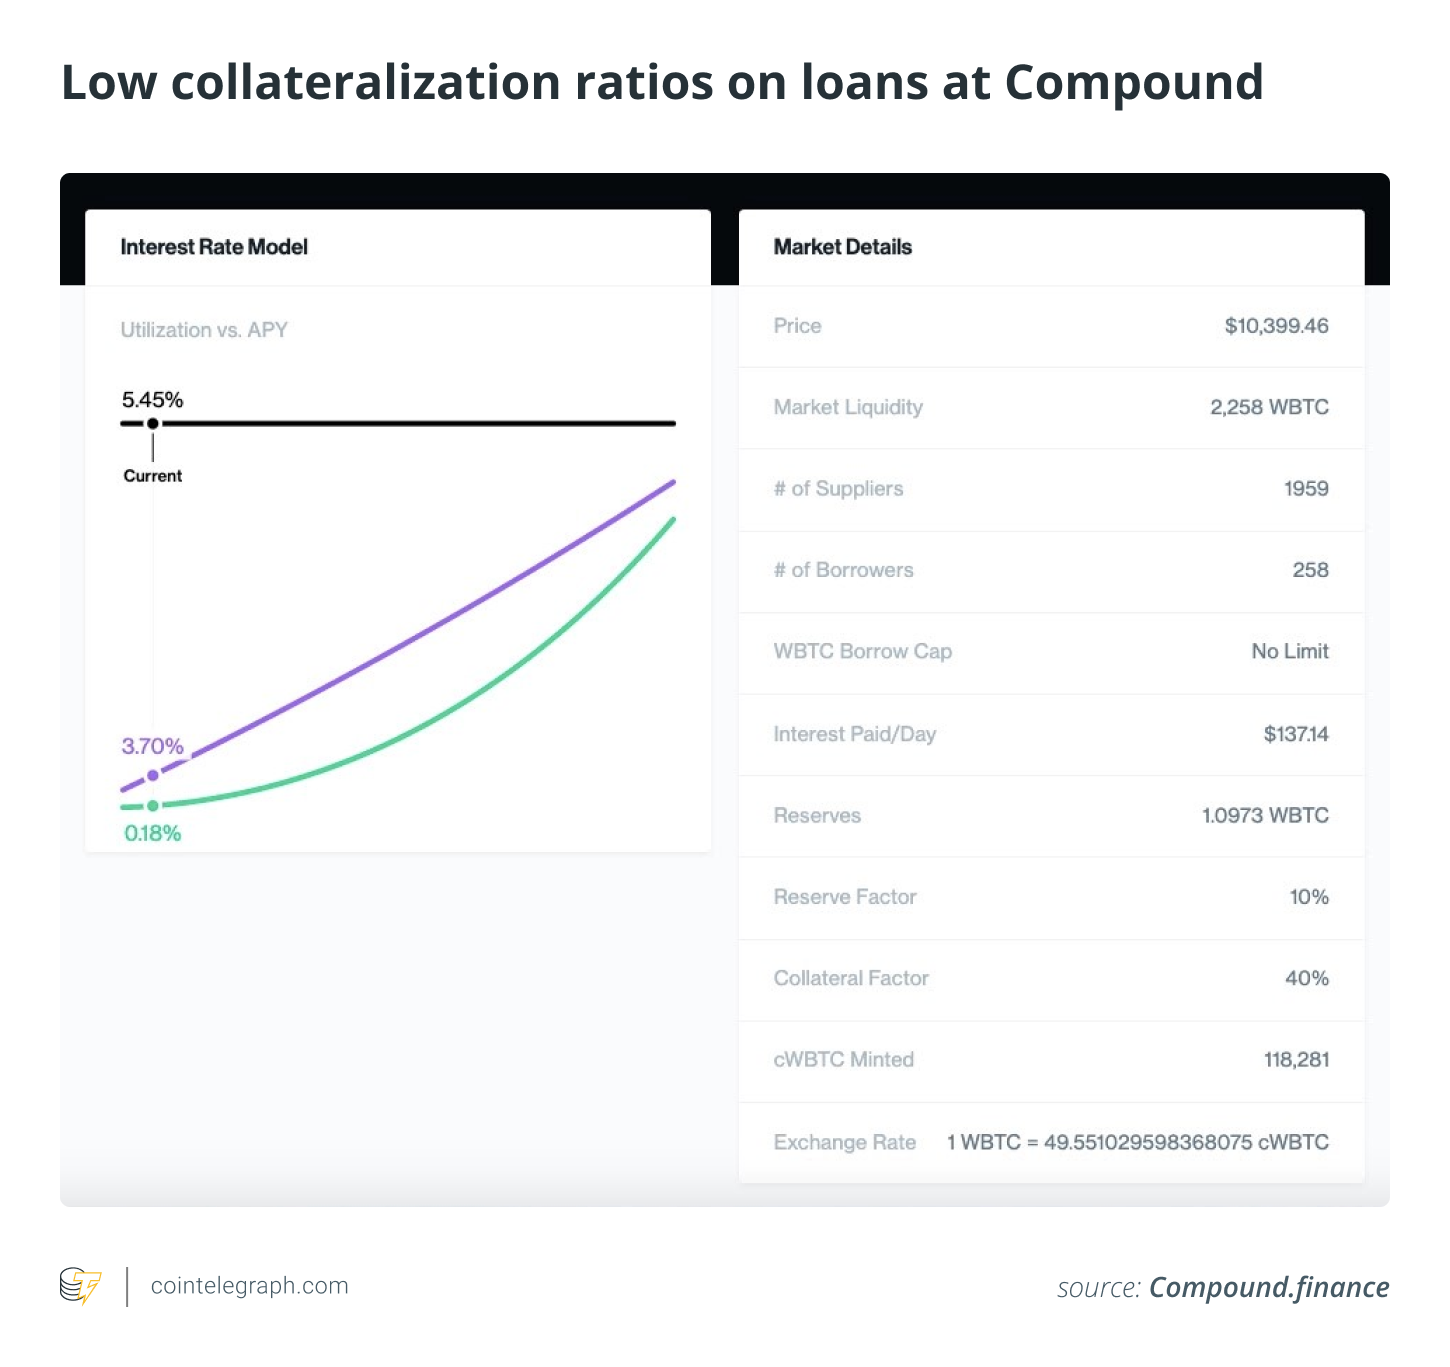 Low collateralization ratios on loans at Compound